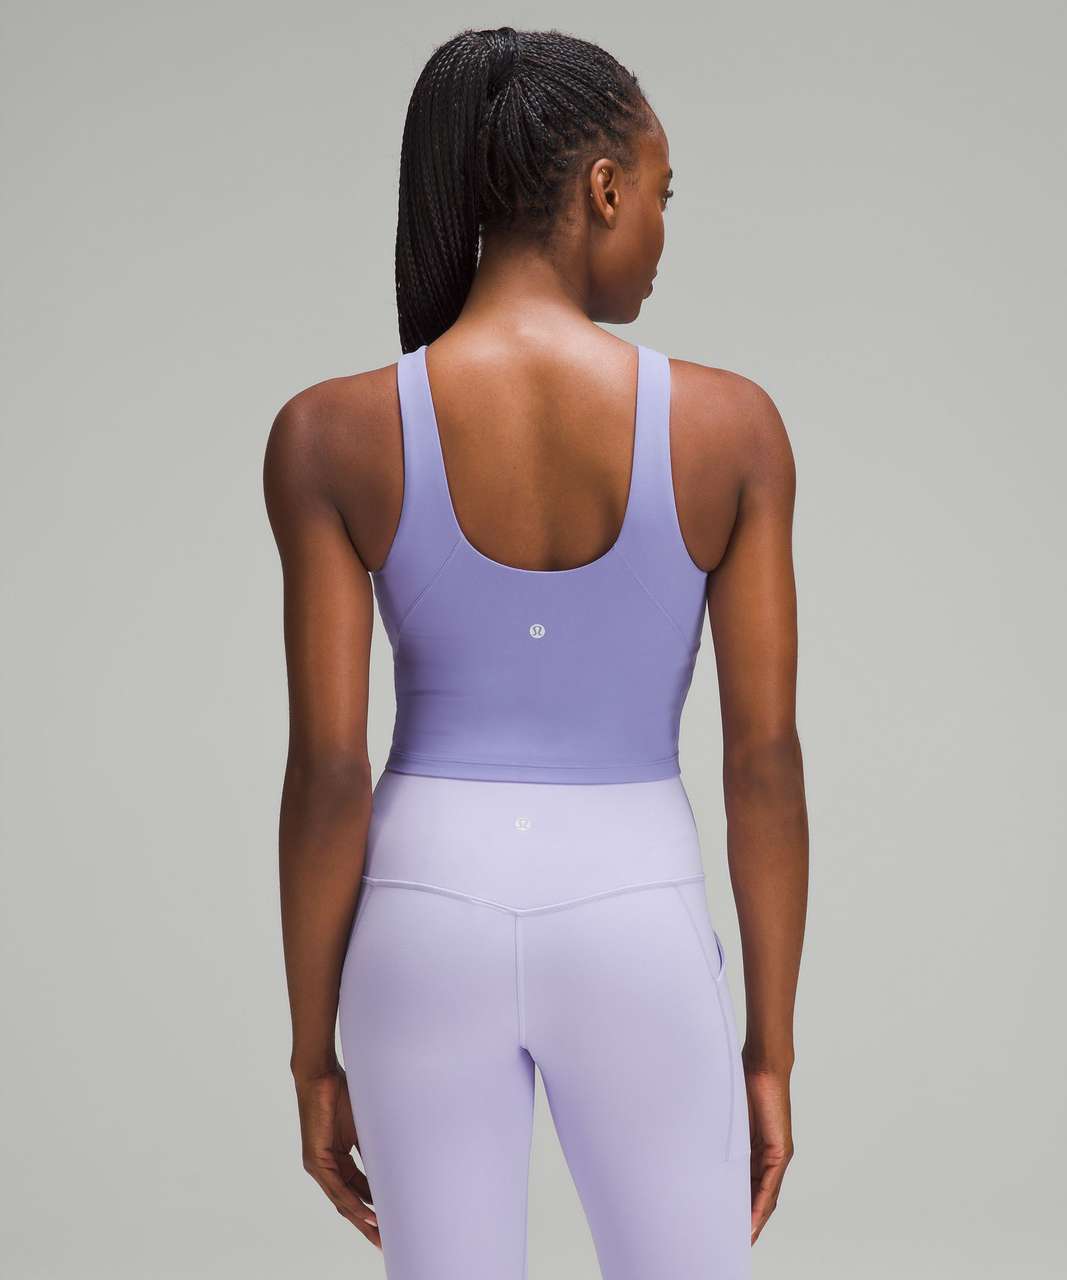 high neck align tank + black groove pants 💕 pink taupe is dreamy 🤤 :  r/lululemon